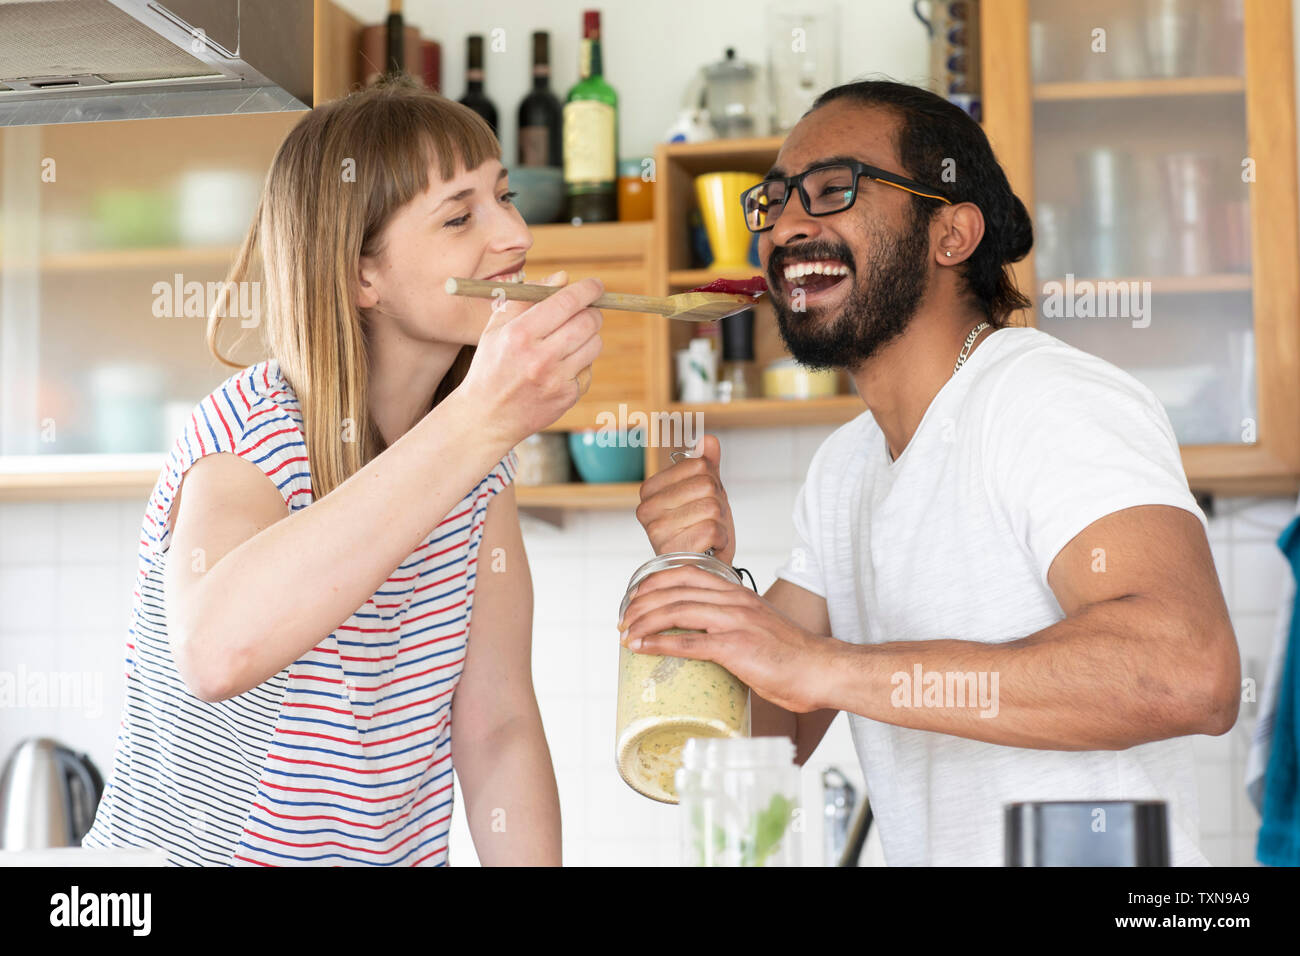 Woman feeding man with wooden spoon in kitchen Stock Photo